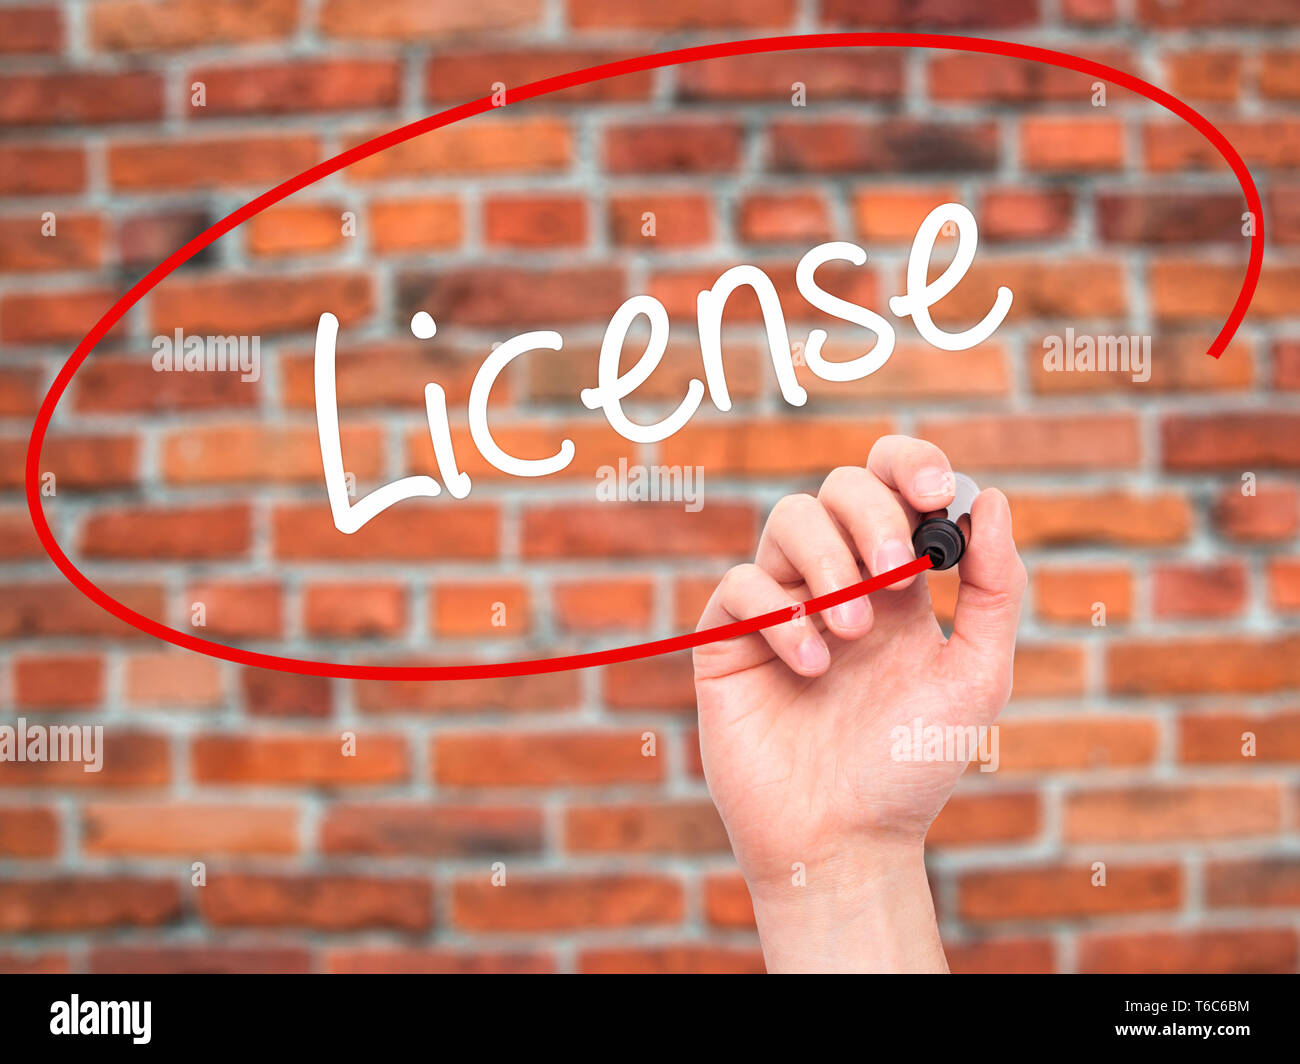 Man Hand writing License with black marker on visual screen Stock Photo